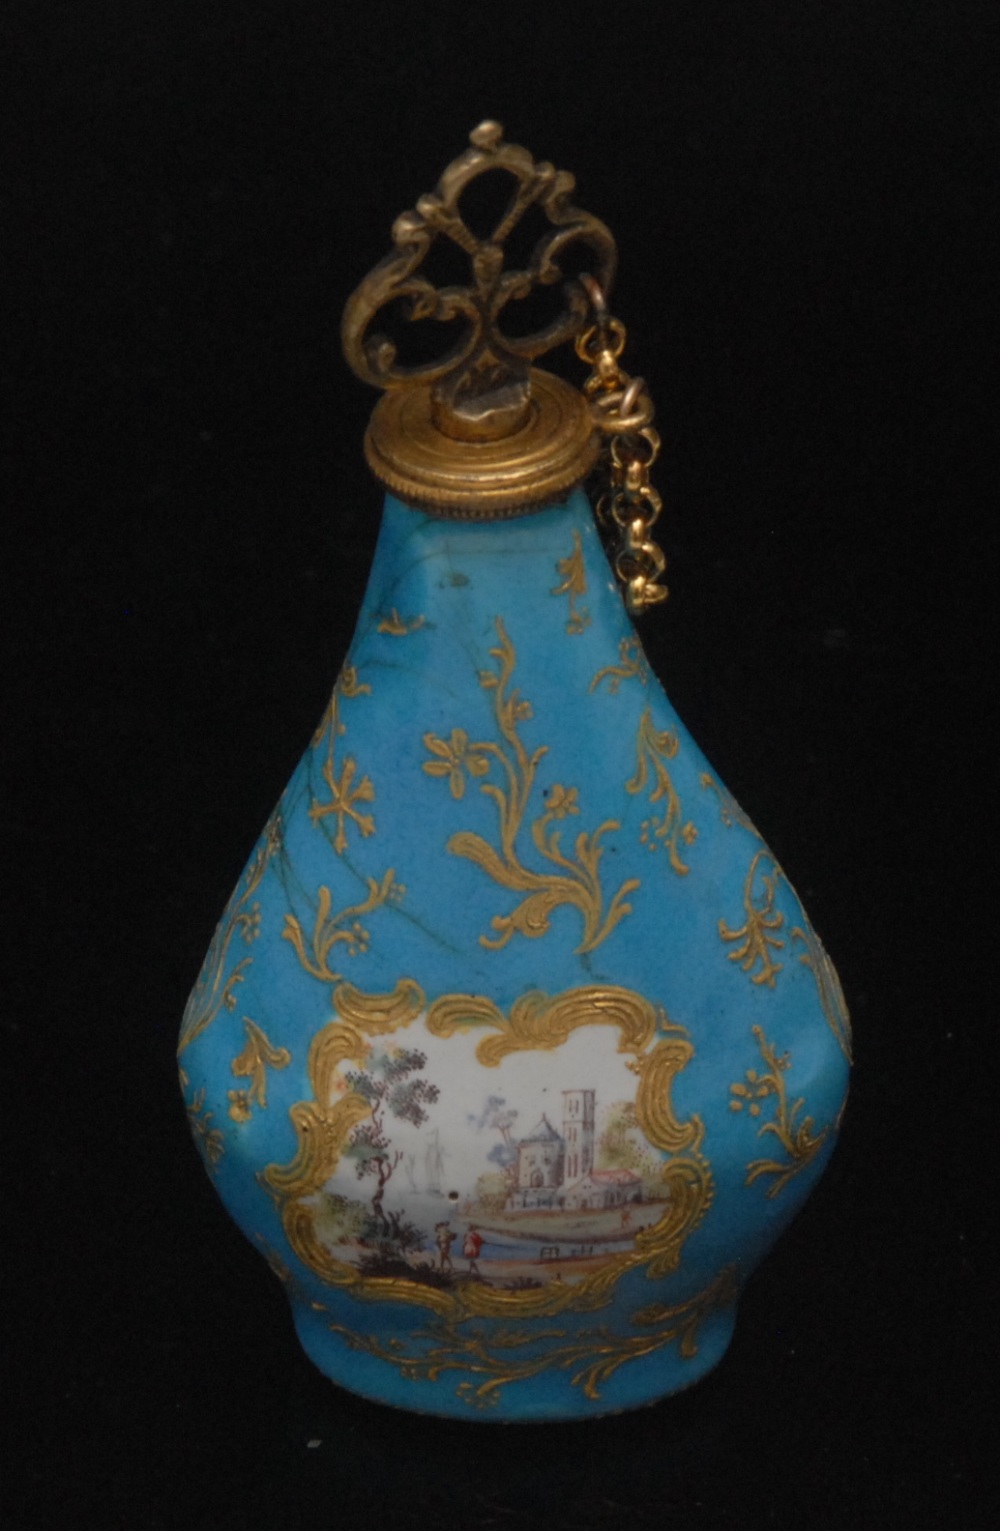 A 'Honeysuckle Group' Staffordshire turquoise enamel scent bottle, with gilt cartouche with